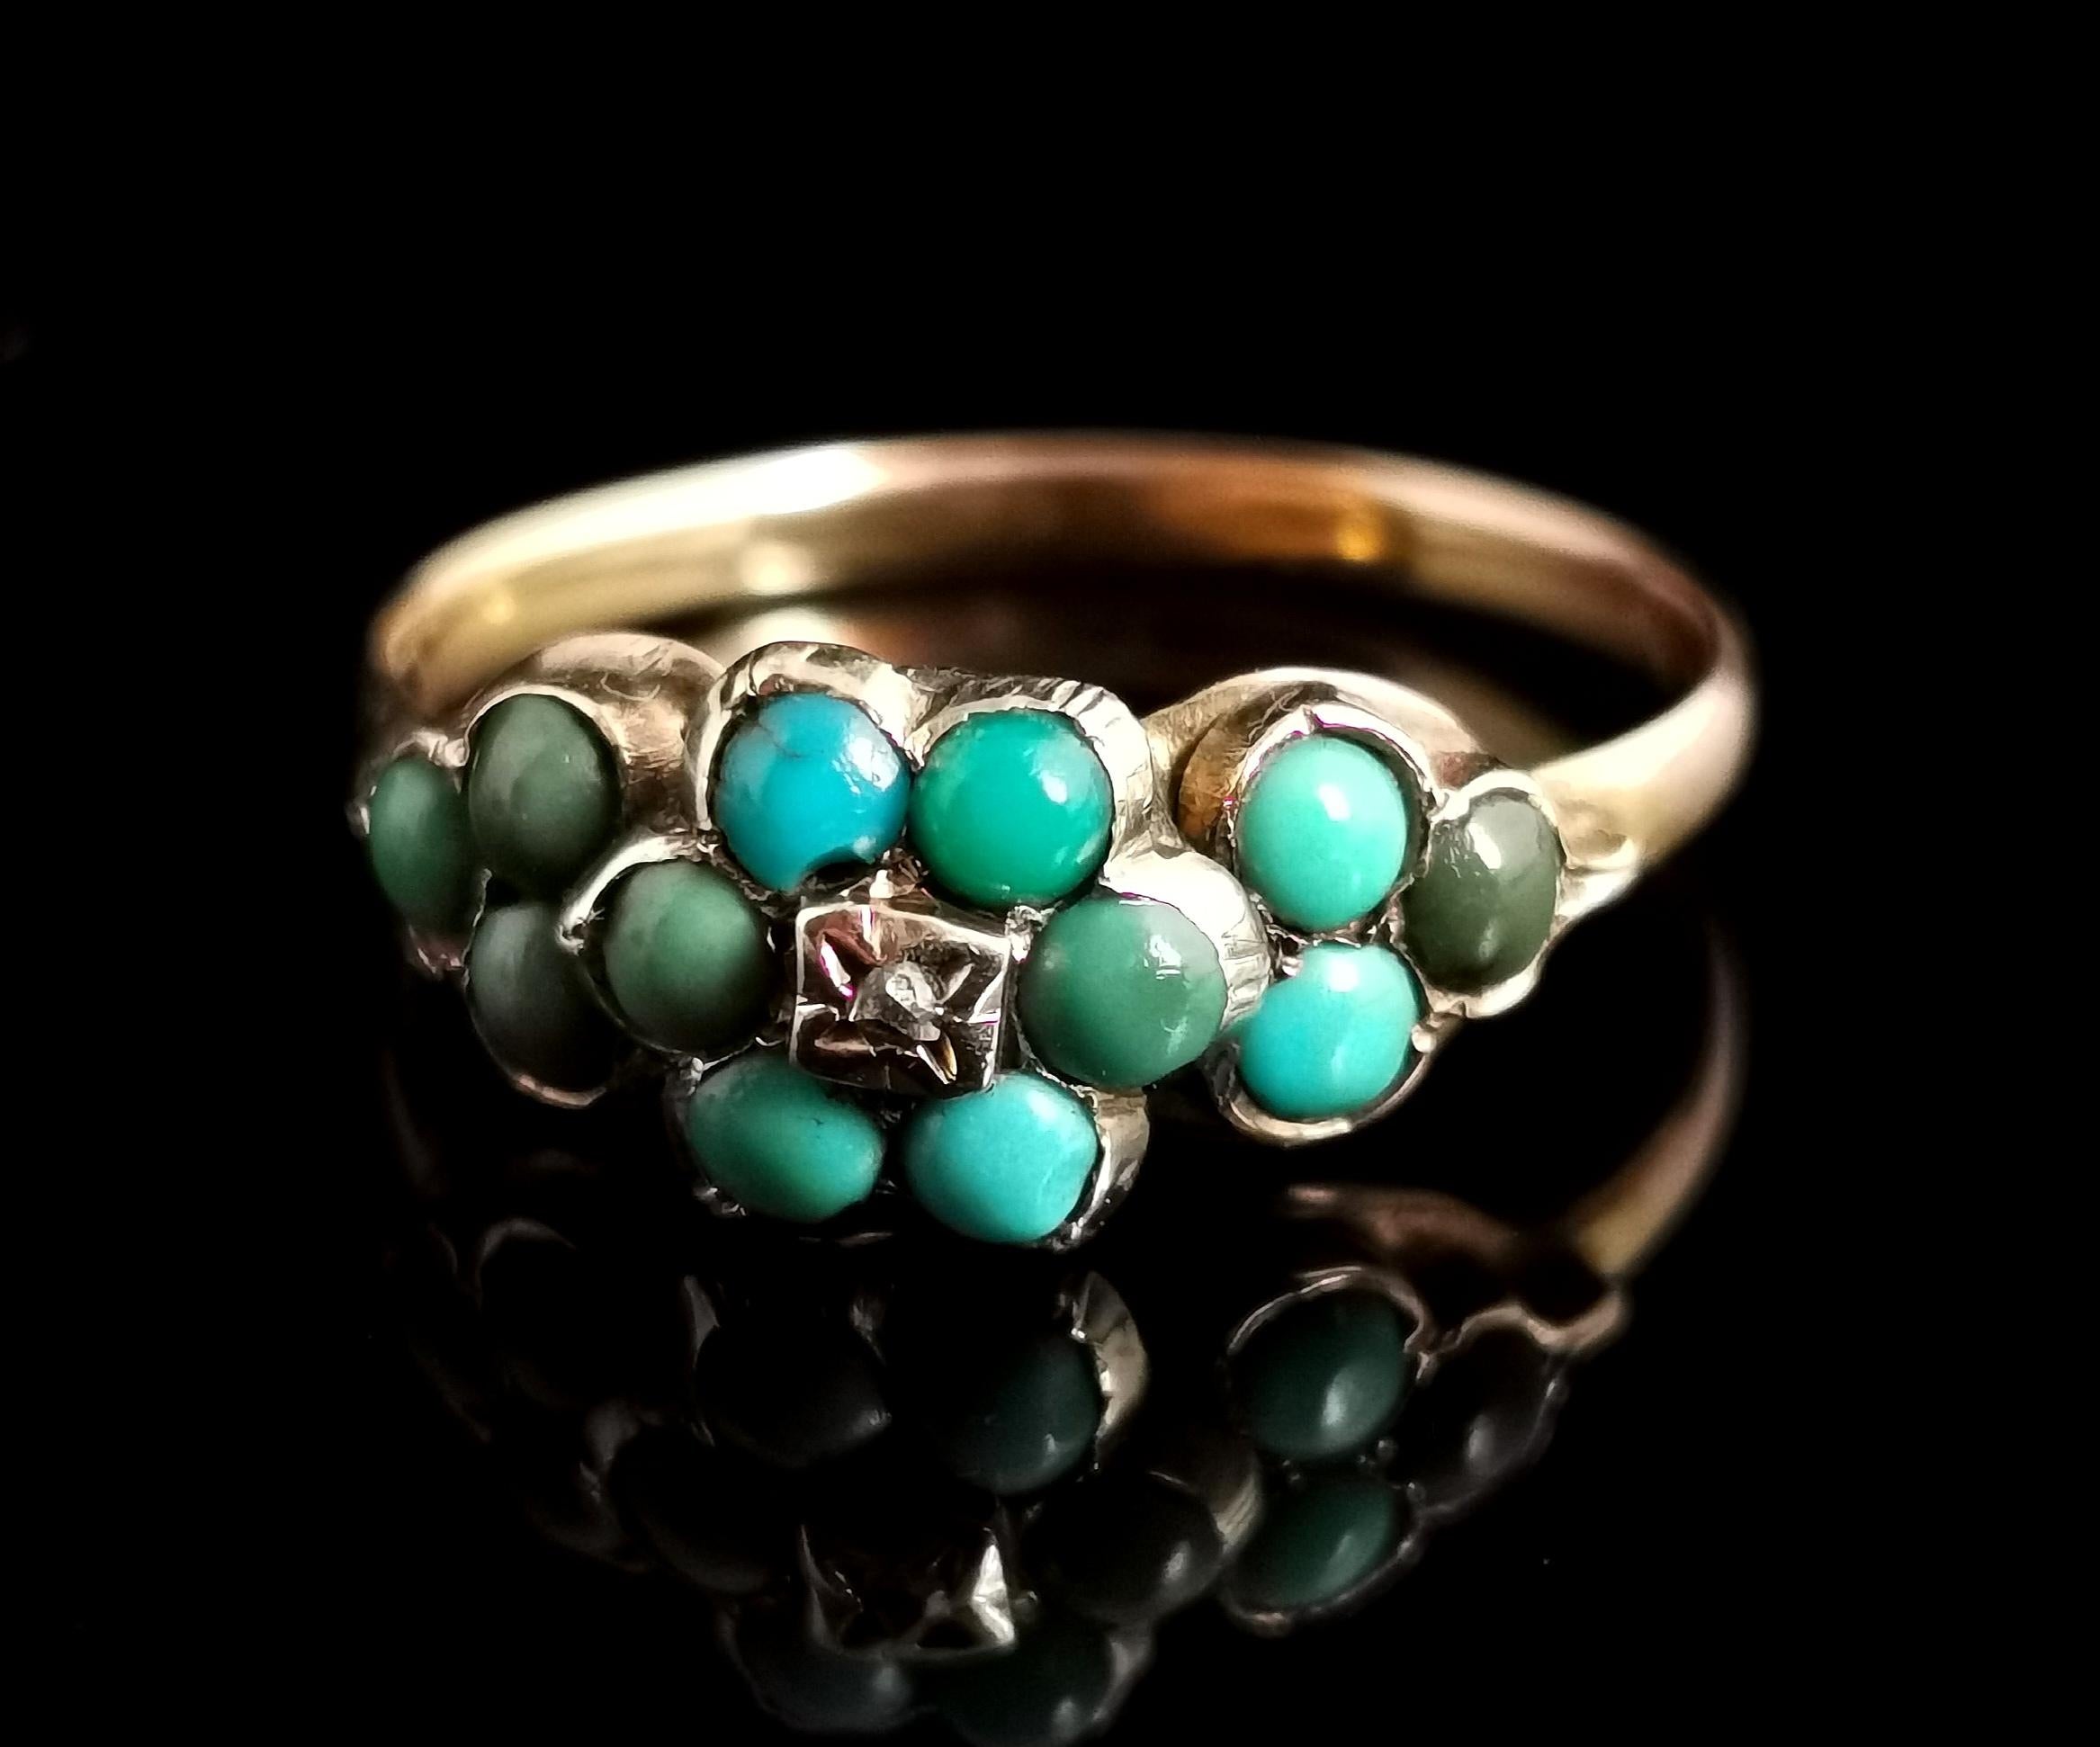 A pretty antique, Mid Victorian era turquoise and Rose cut diamond cluster ring.

The face of the ring features beautiful turquoise cabochons in an array of greens arranged as a forget me not flower with a further turquoise set trefoil to each